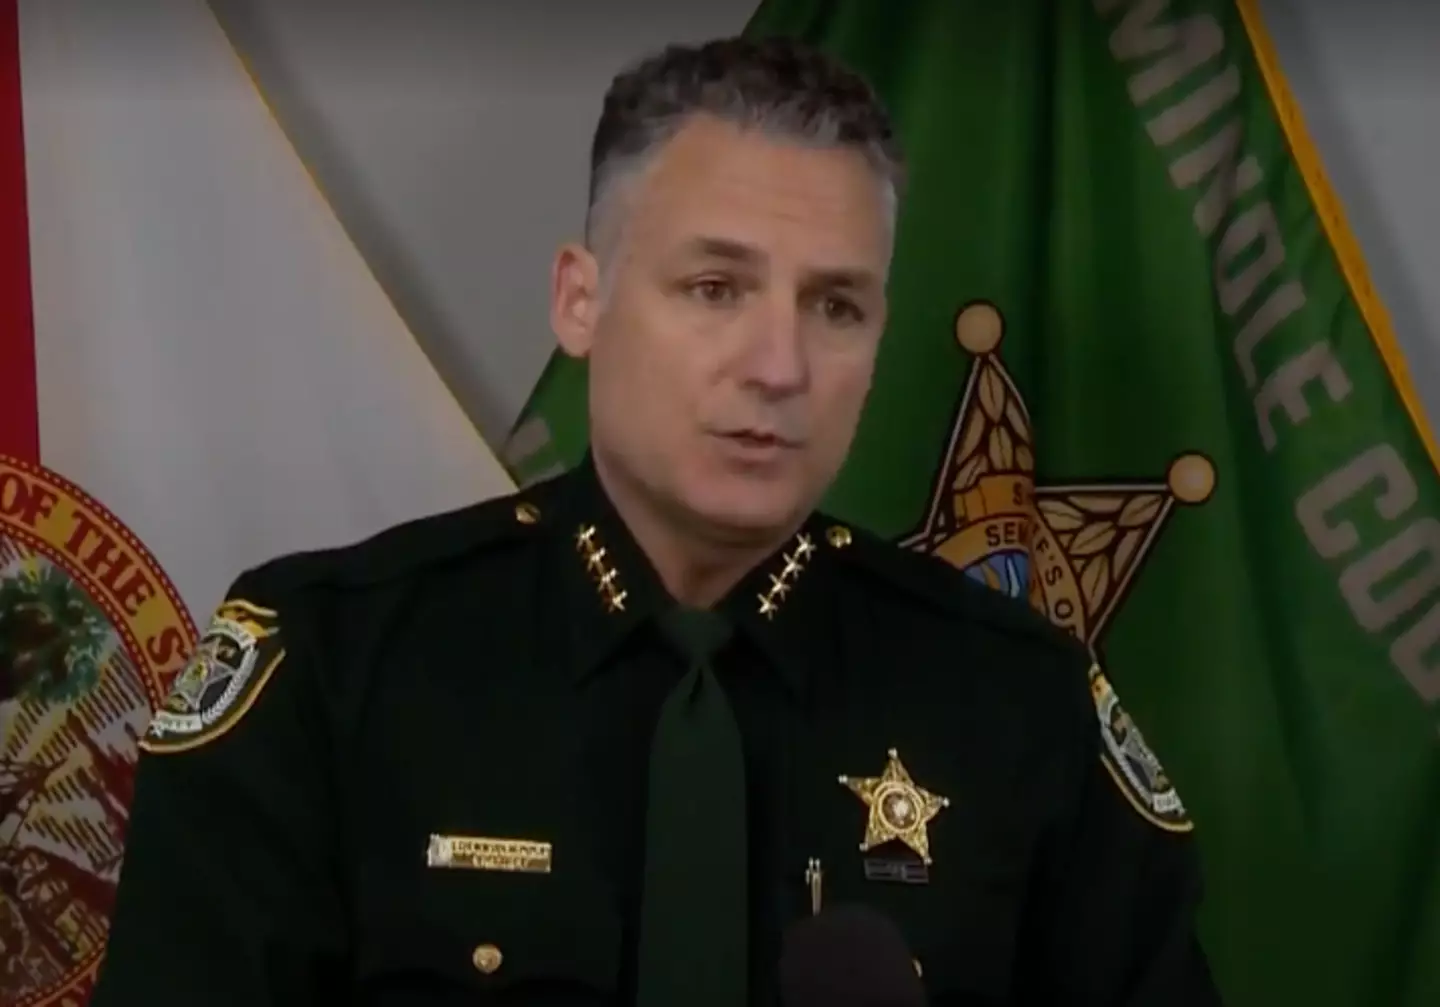 Seminole County Sheriff Dennis Lemma said the victim's husband has 'cooperated' with police and is not a suspect. (Facebook/Seminole County Sheriff's Office)